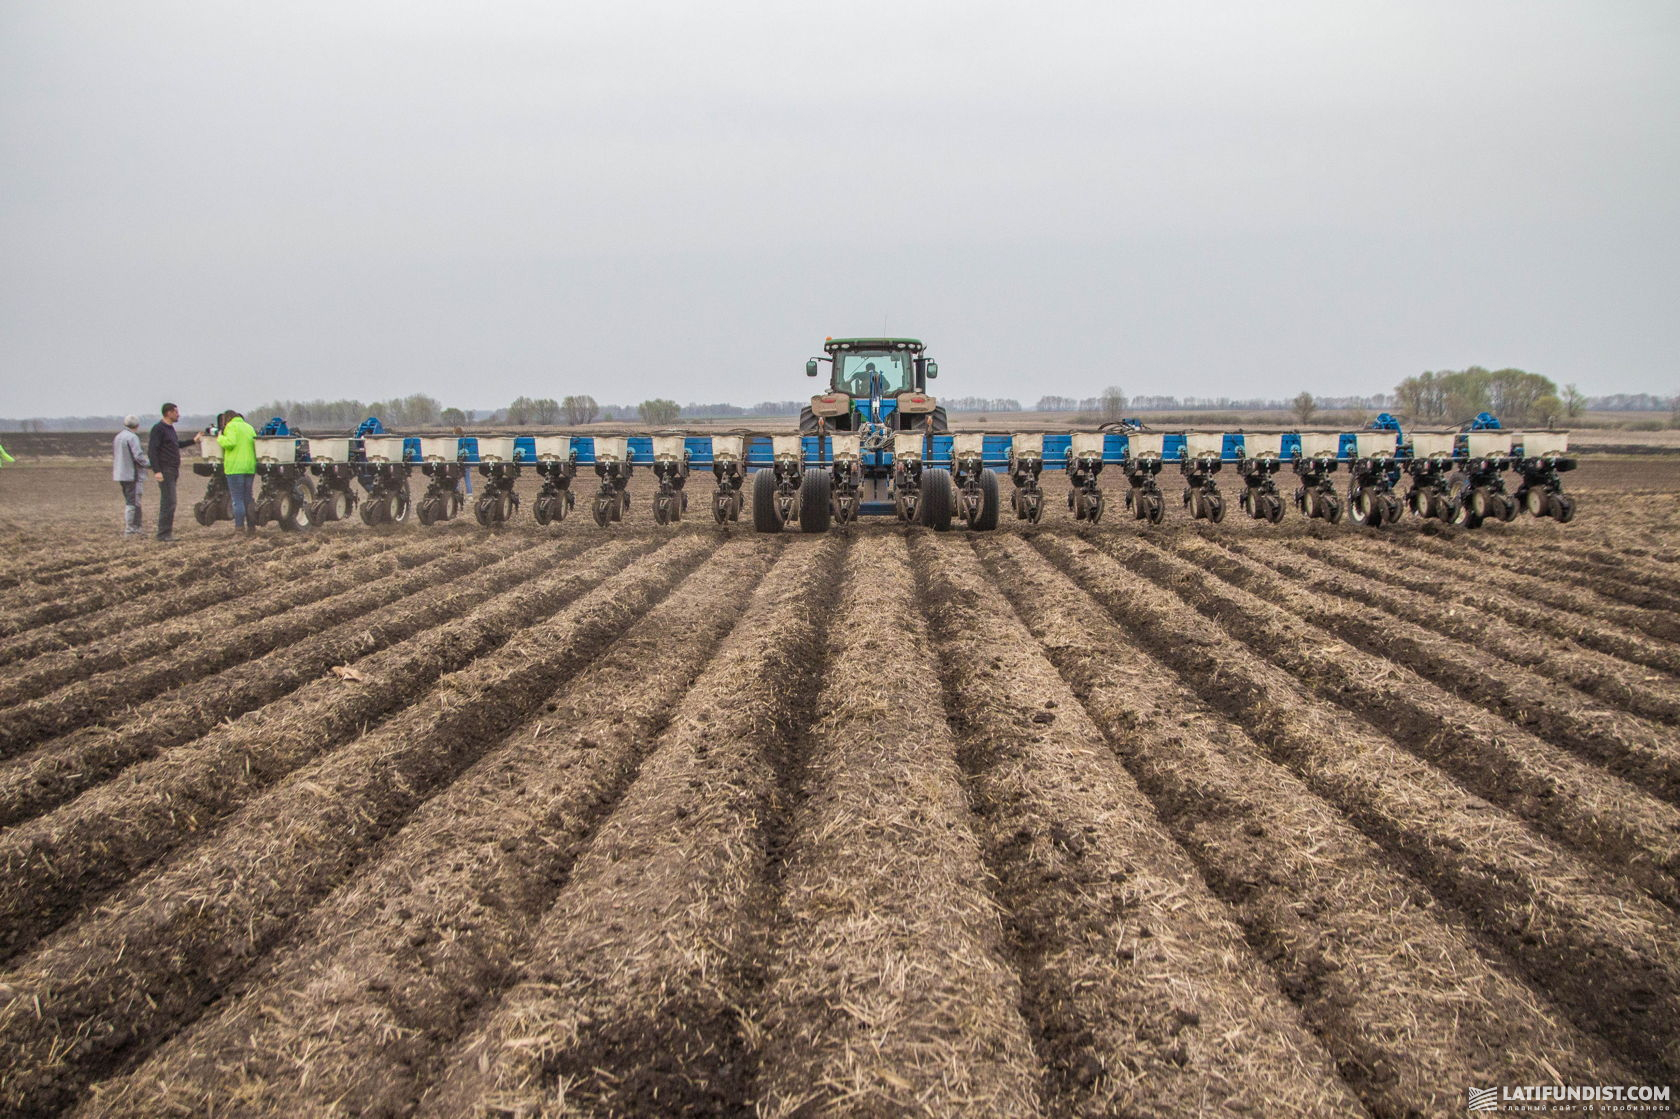 Sowing campaign in Ukrlandfarming fields